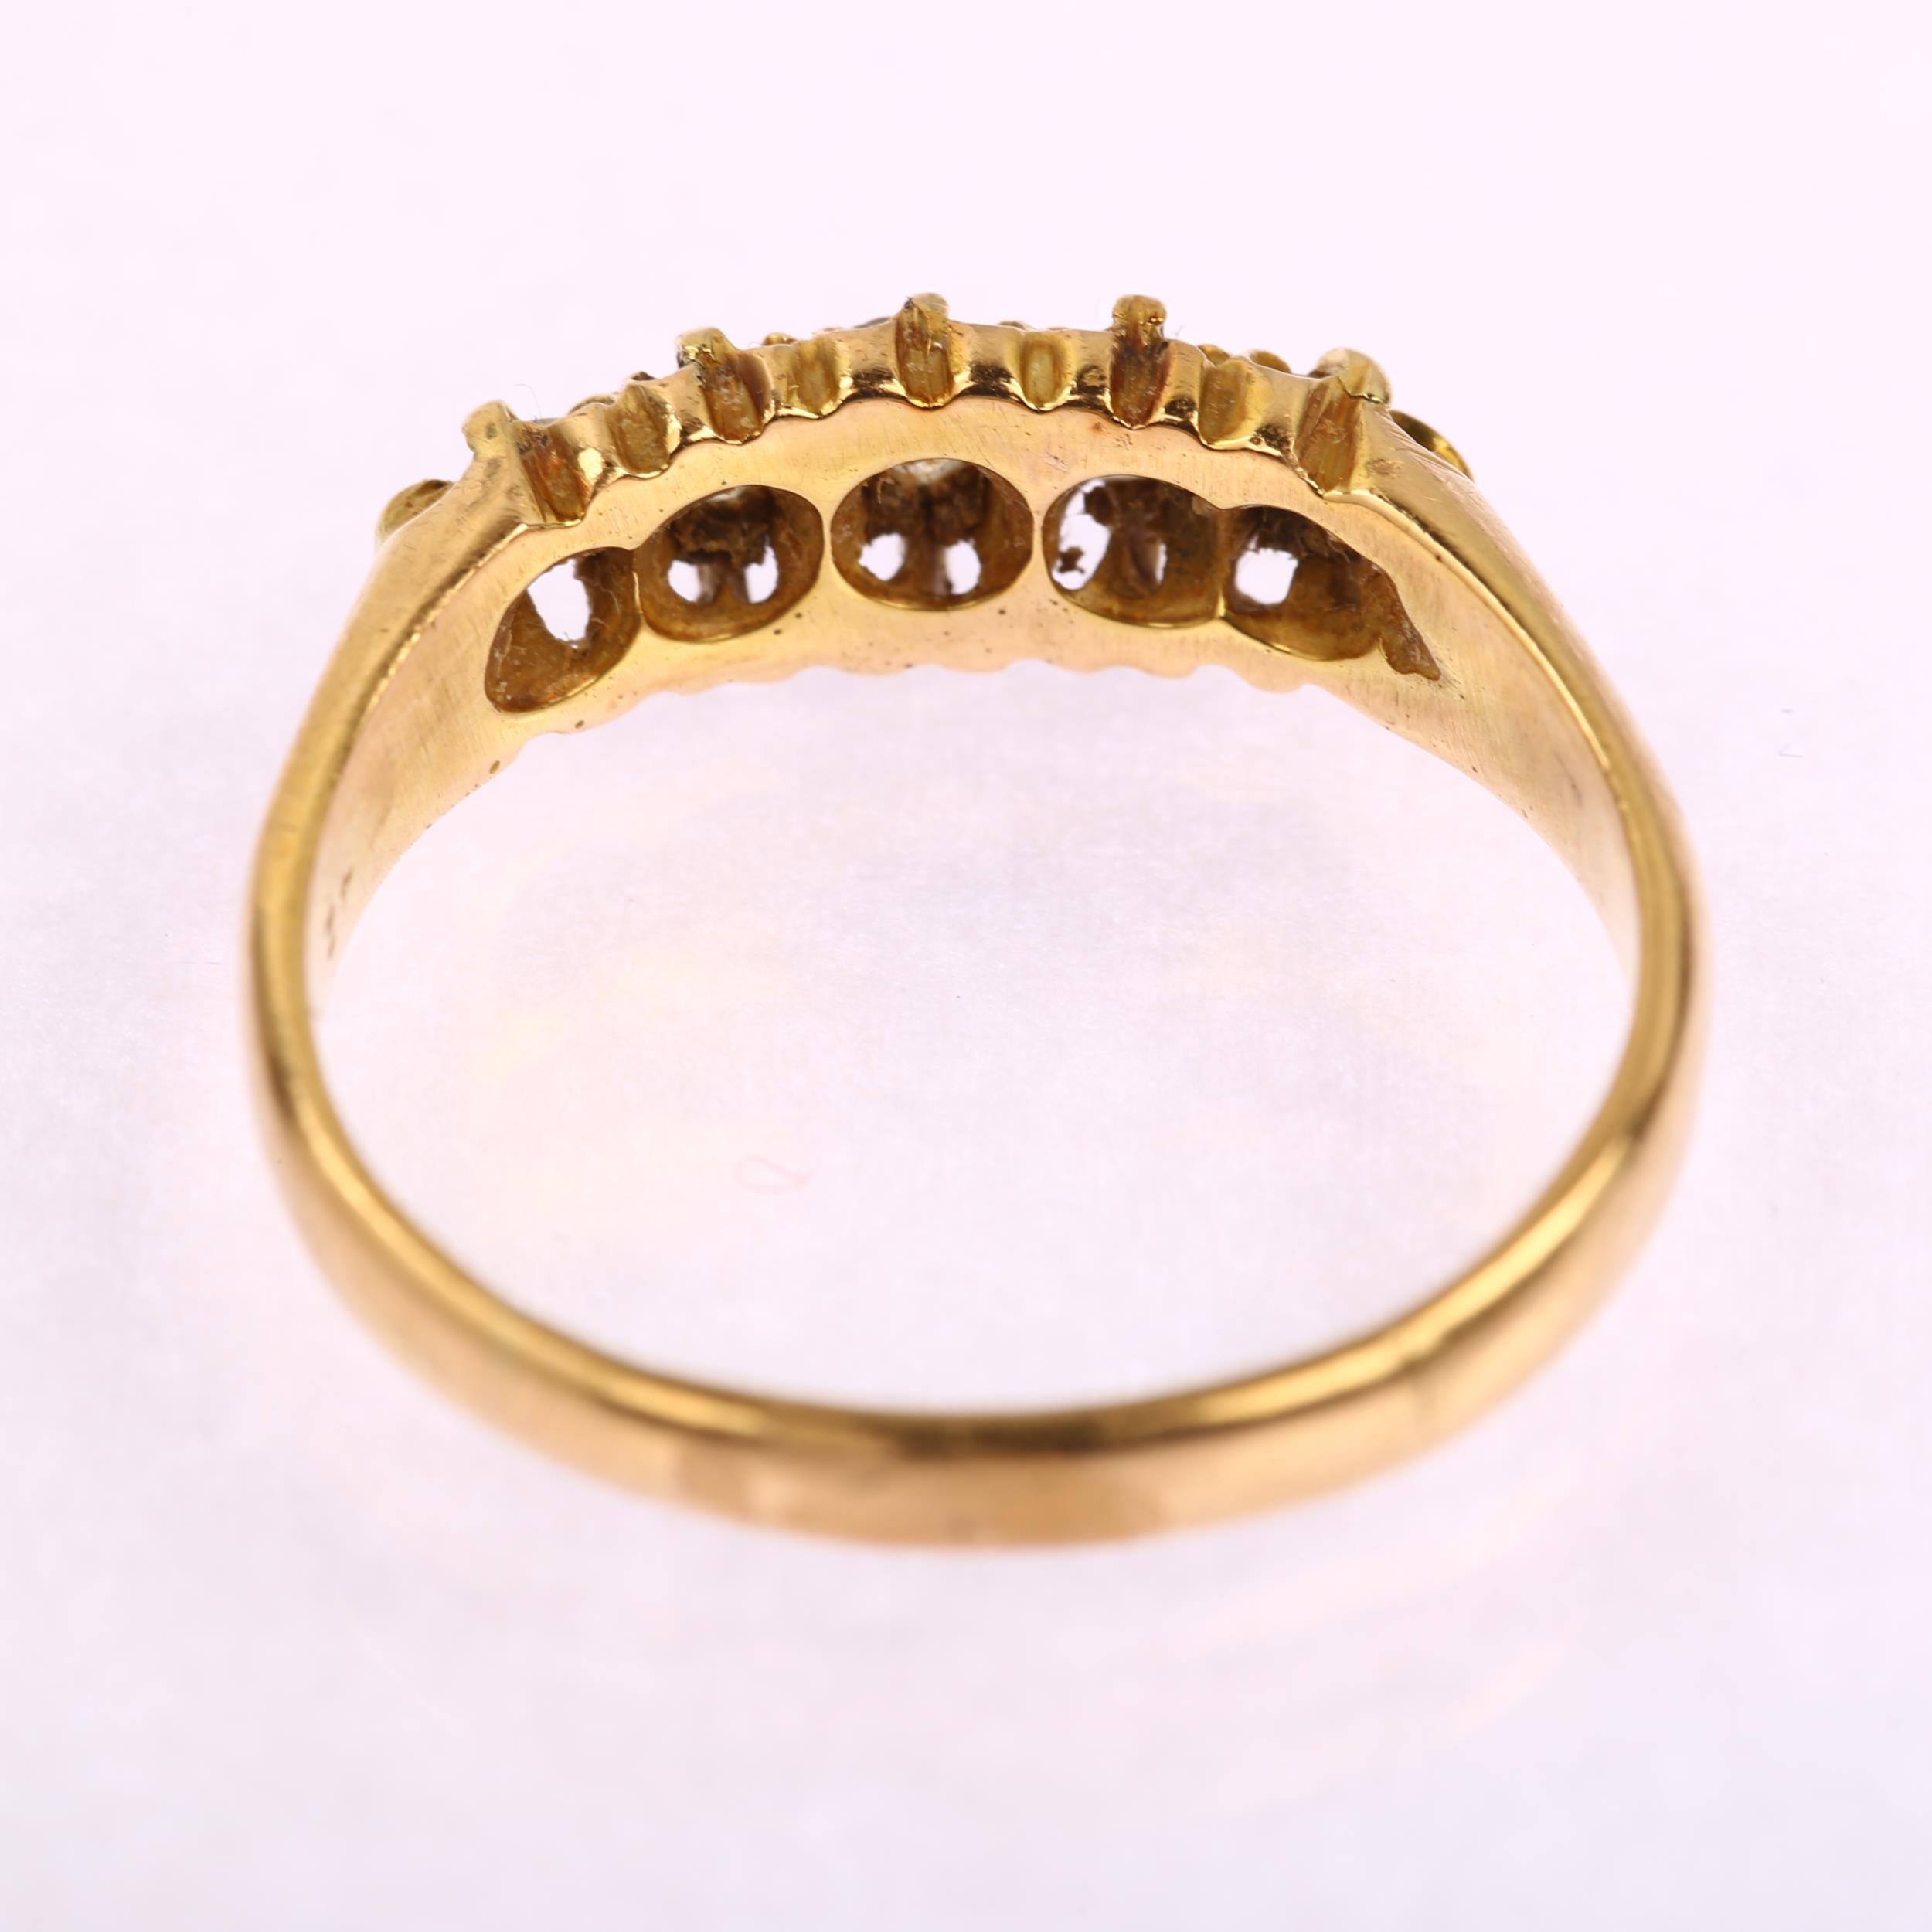 An early 20th century 18ct gold graduated five stone diamond half hoop ring, set with old-cut - Image 3 of 4